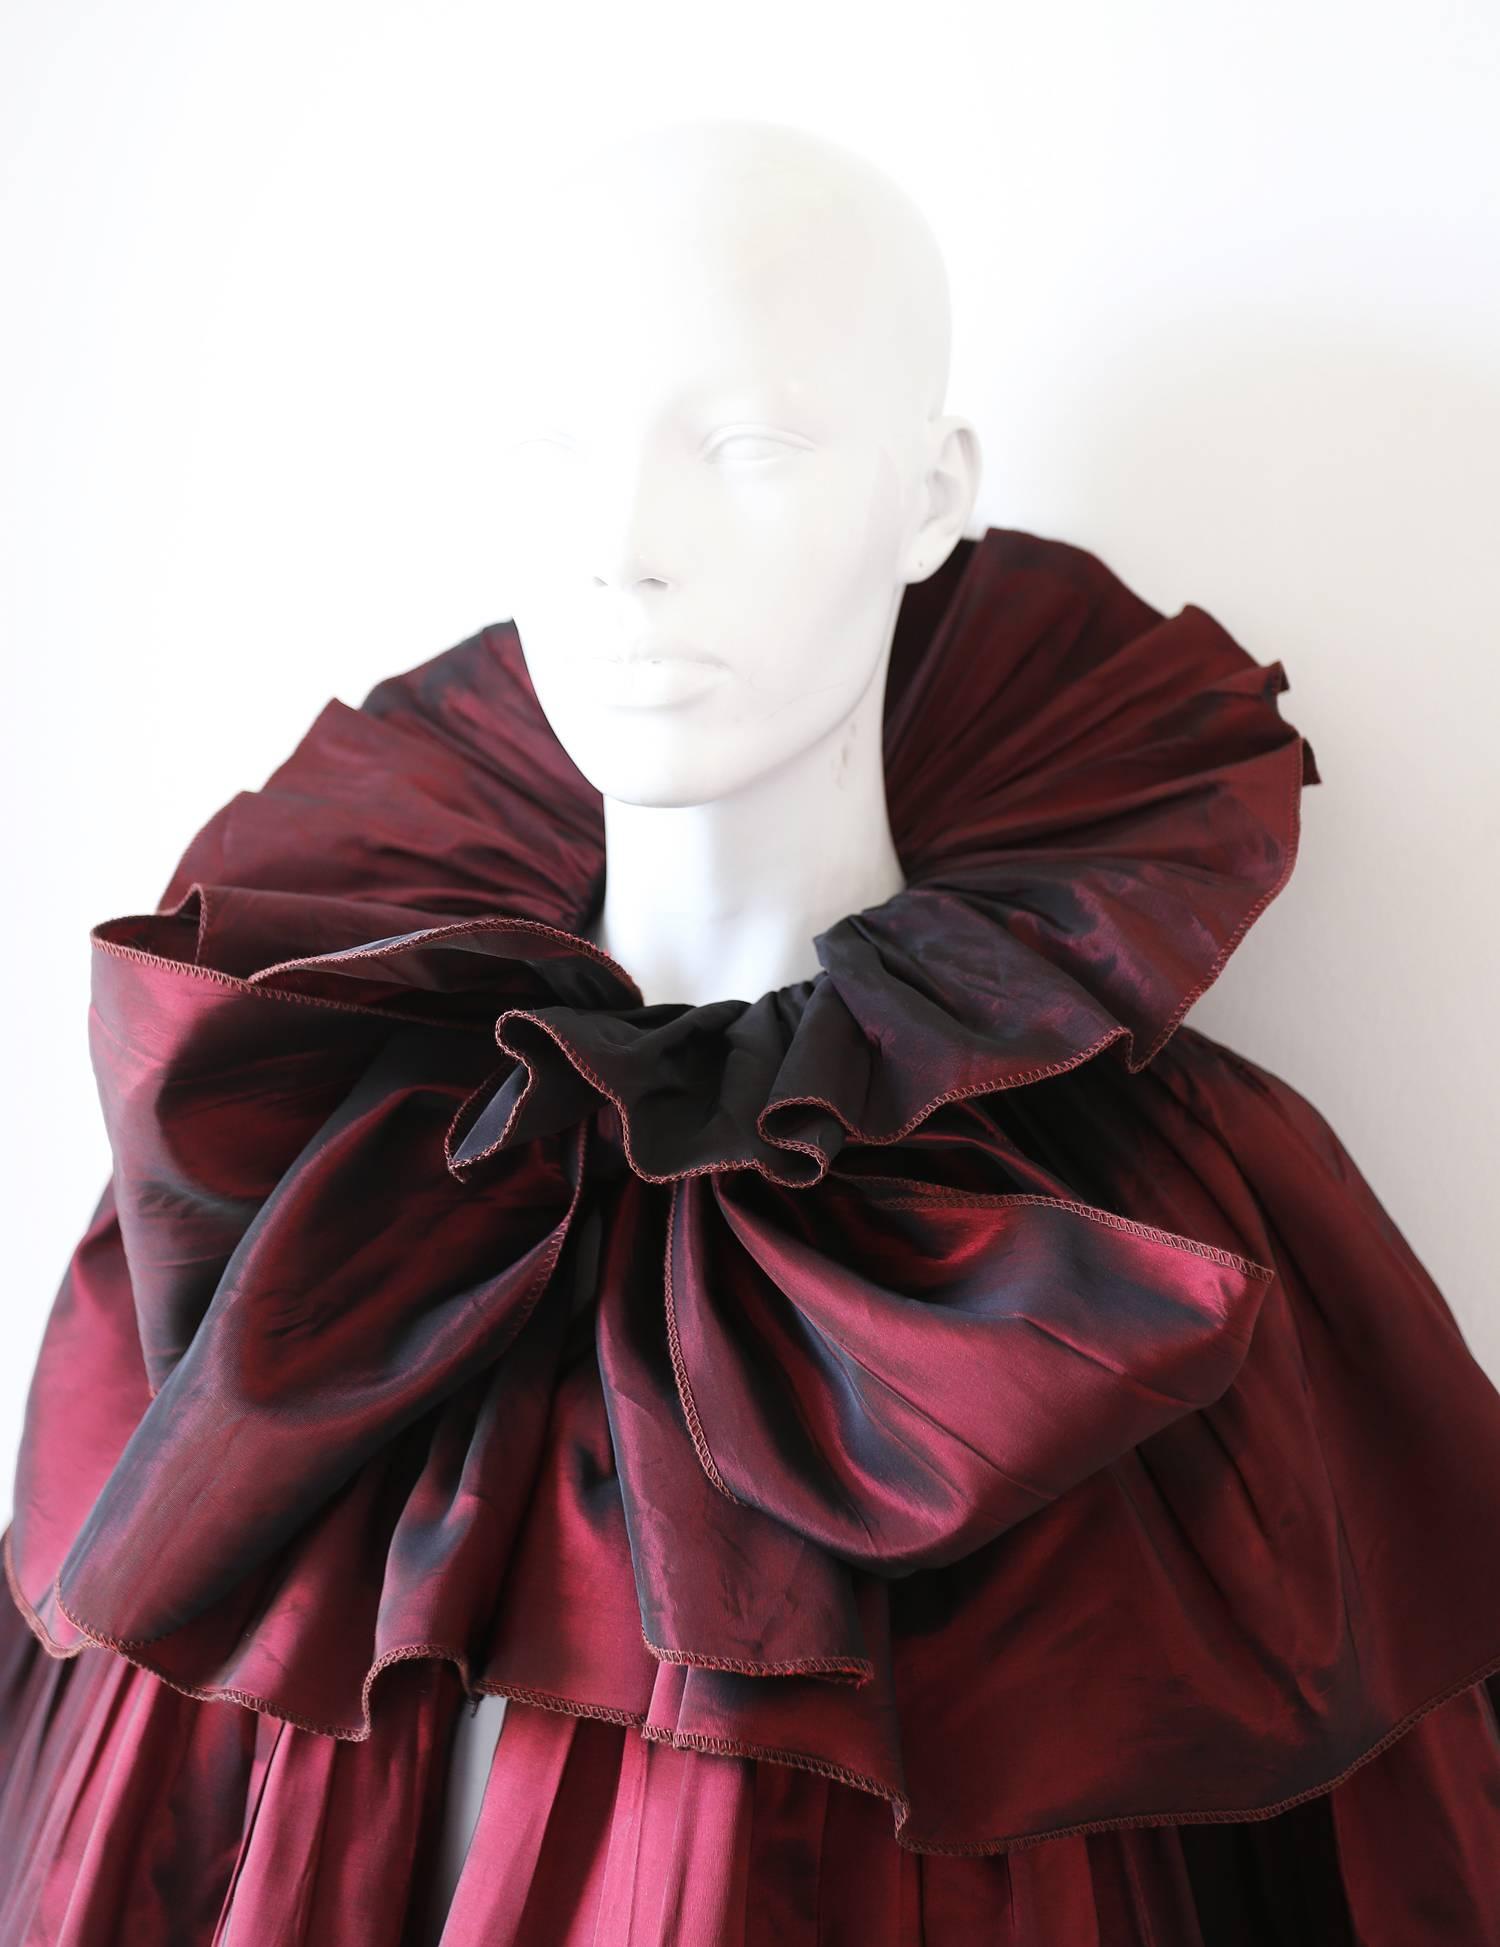 Extraordinary Roland Klein at Marcel Fenez two tone silk taffeta evening cape from the 1980s. The cape features ruffled tiered design with a long sash fastening around the collar. 

One Size